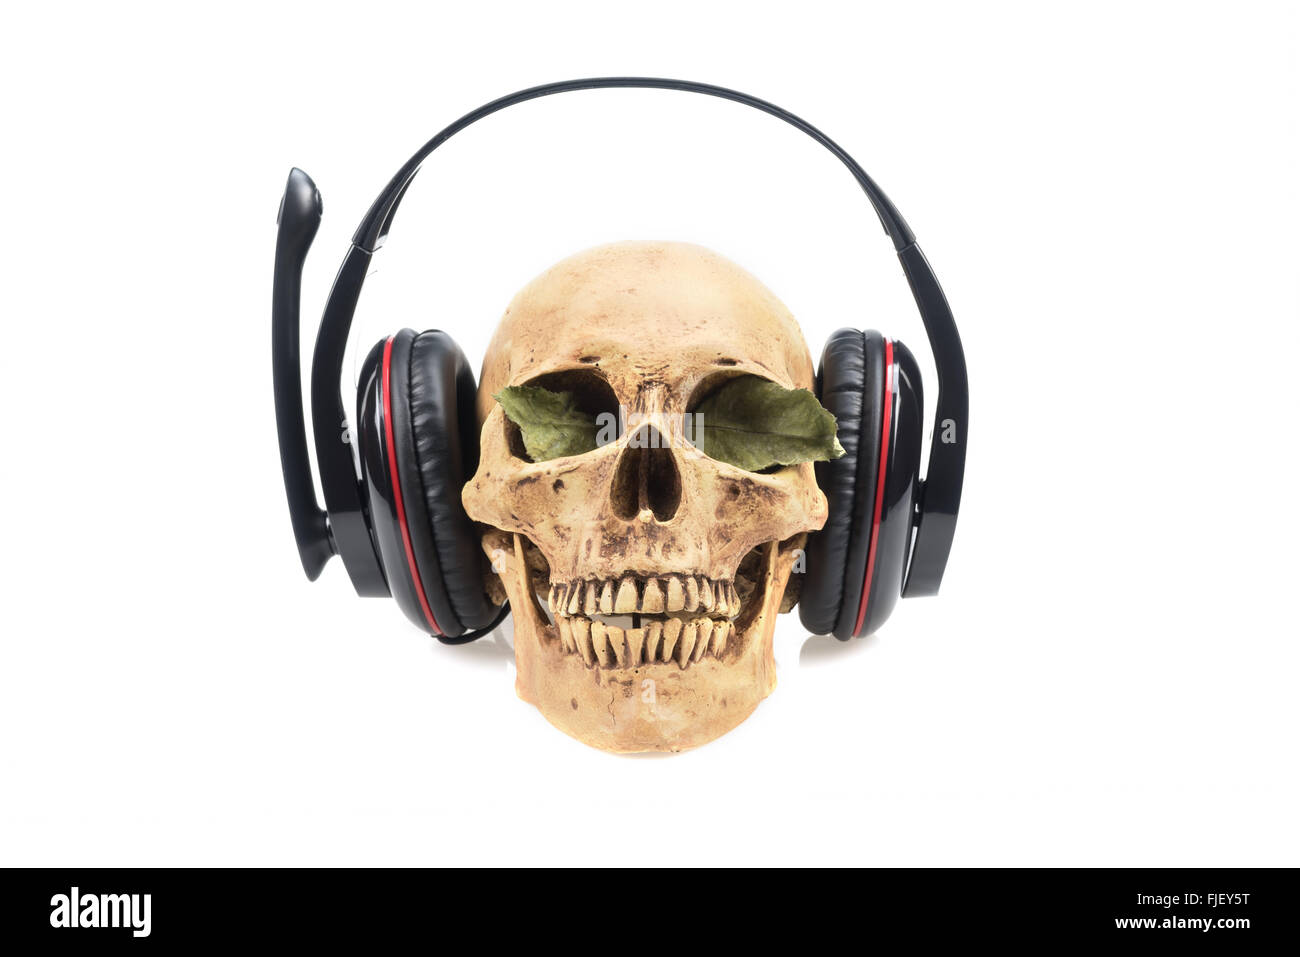 Human skull  in headphones isolated on a white background. Stock Photo